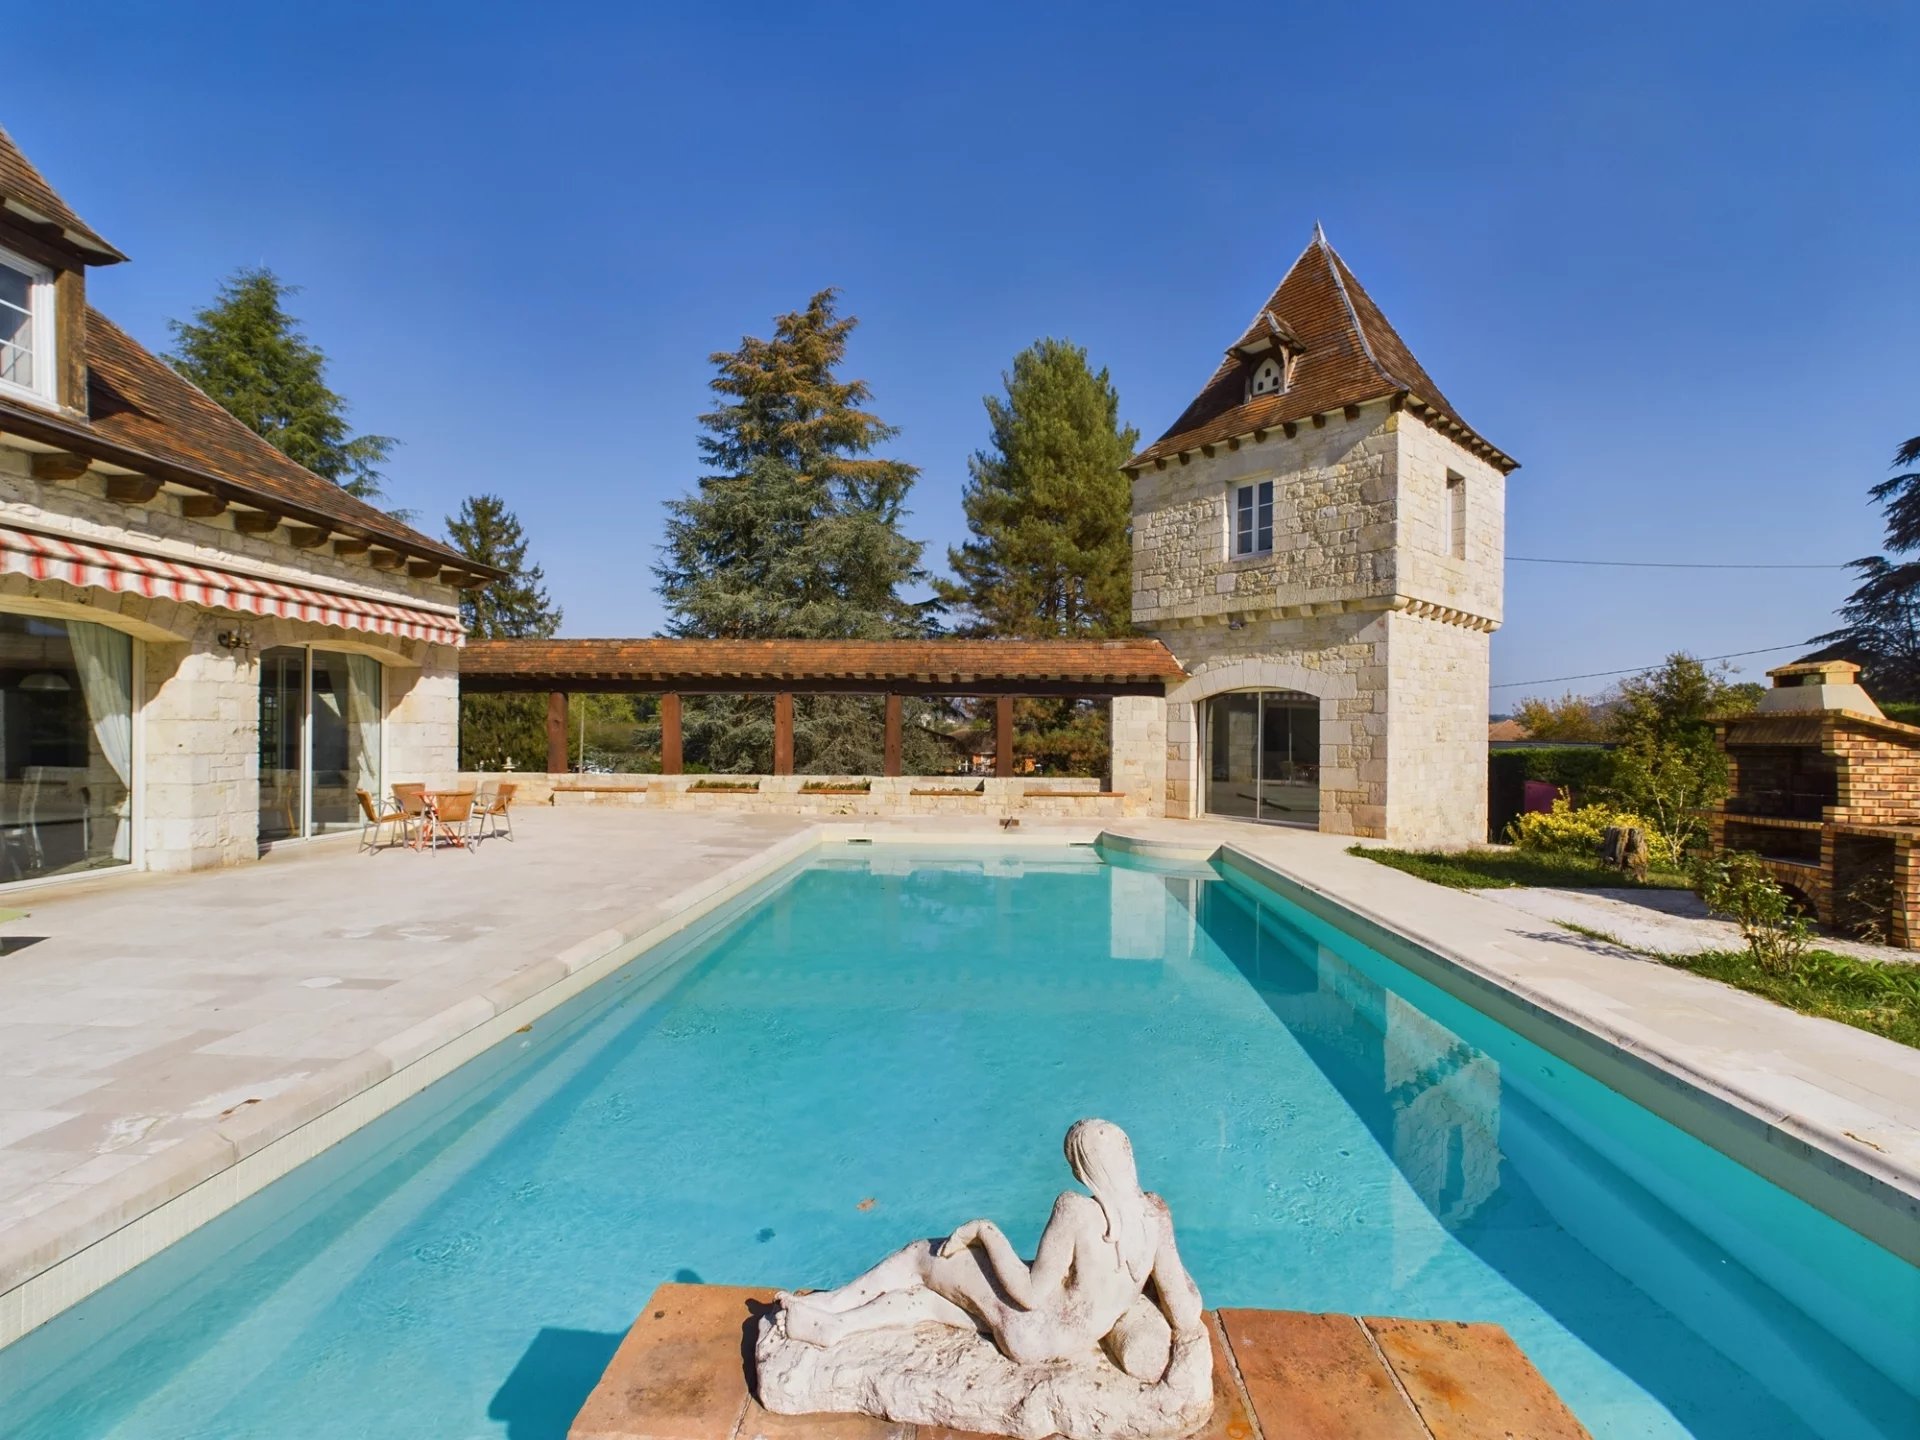 Stunning 6 bedroom property with swimming pool at the gates of a bastide